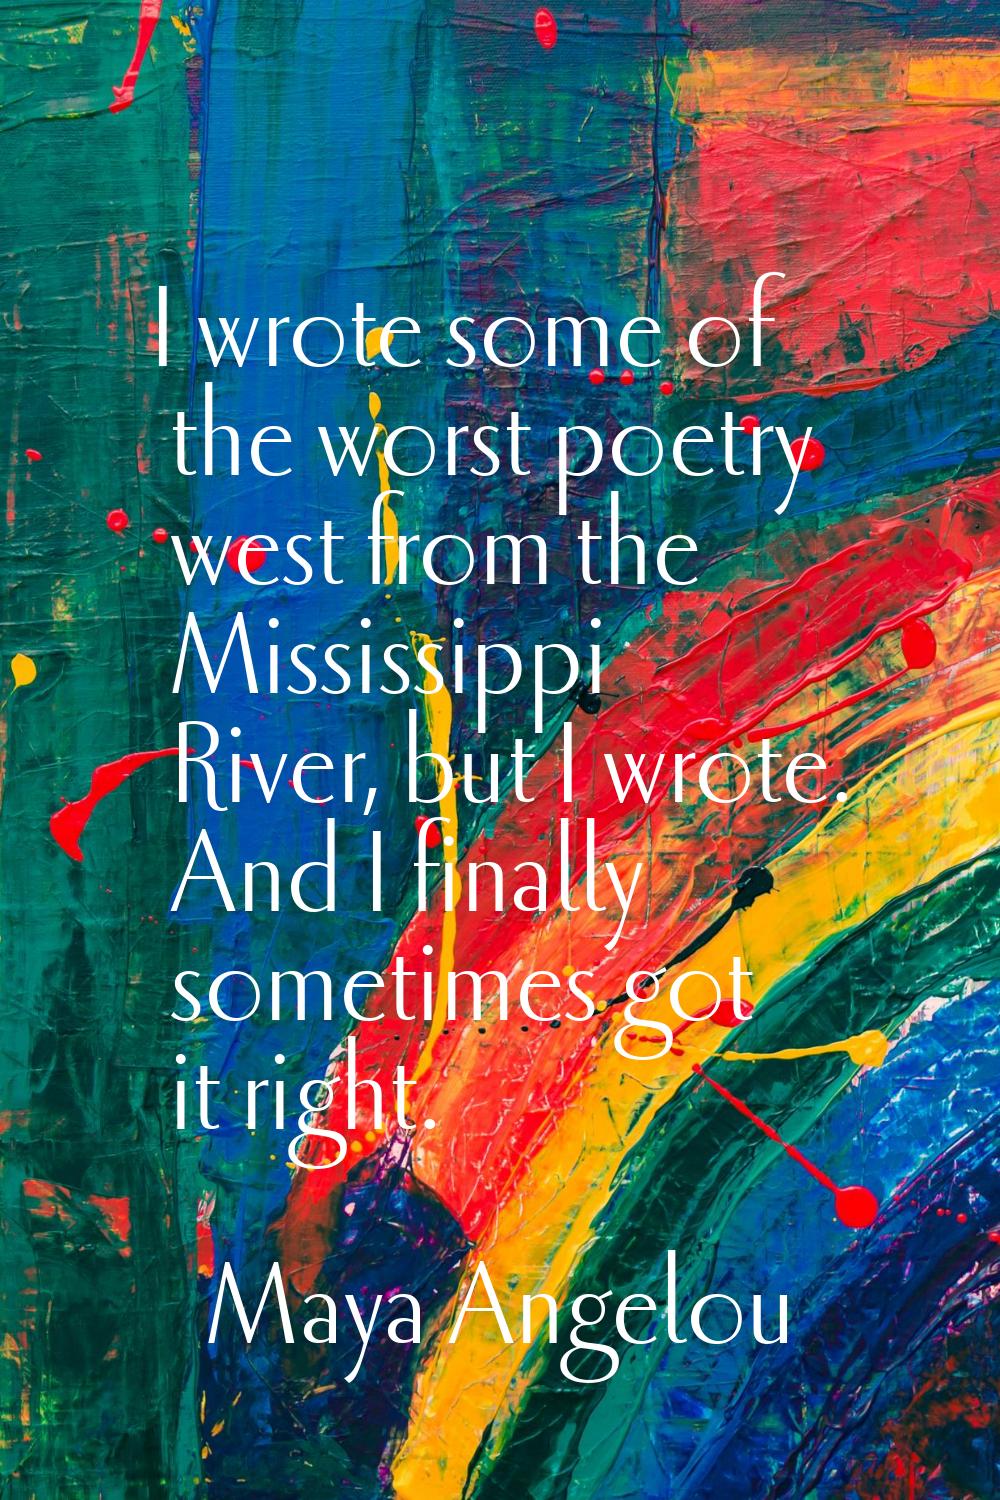 I wrote some of the worst poetry west from the Mississippi River, but I wrote. And I finally someti